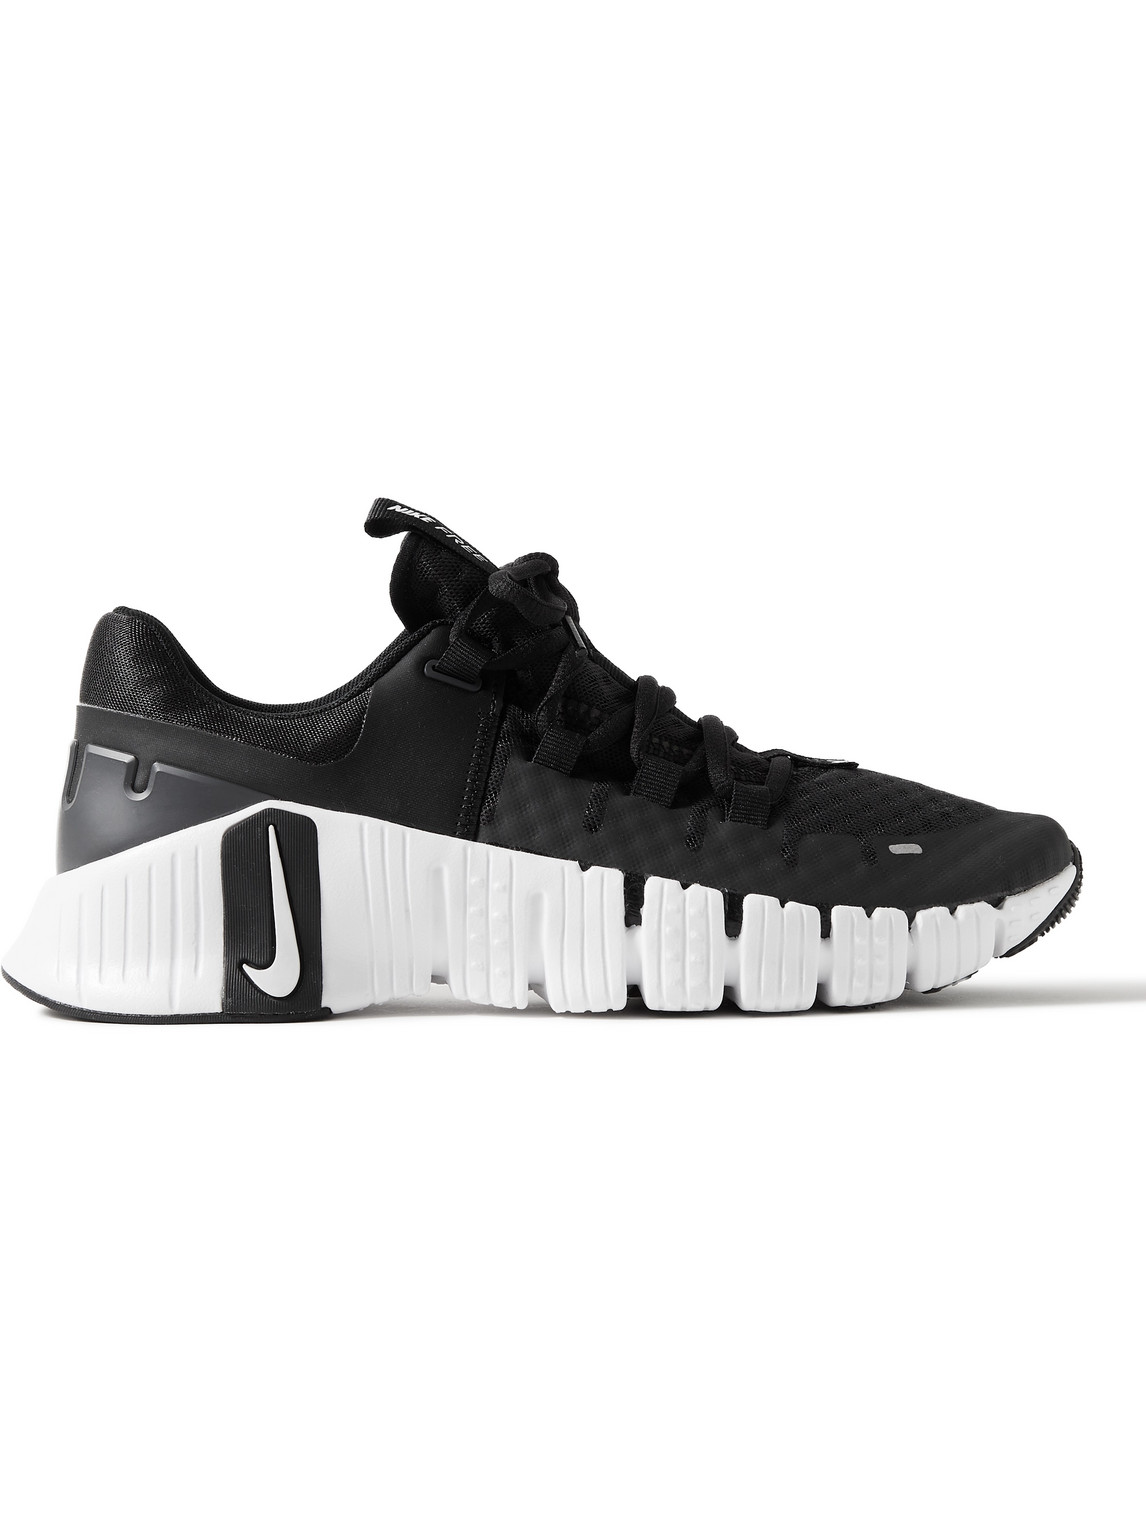 Free Metcon 5 Rubber-Trimmed Mesh Sneakers